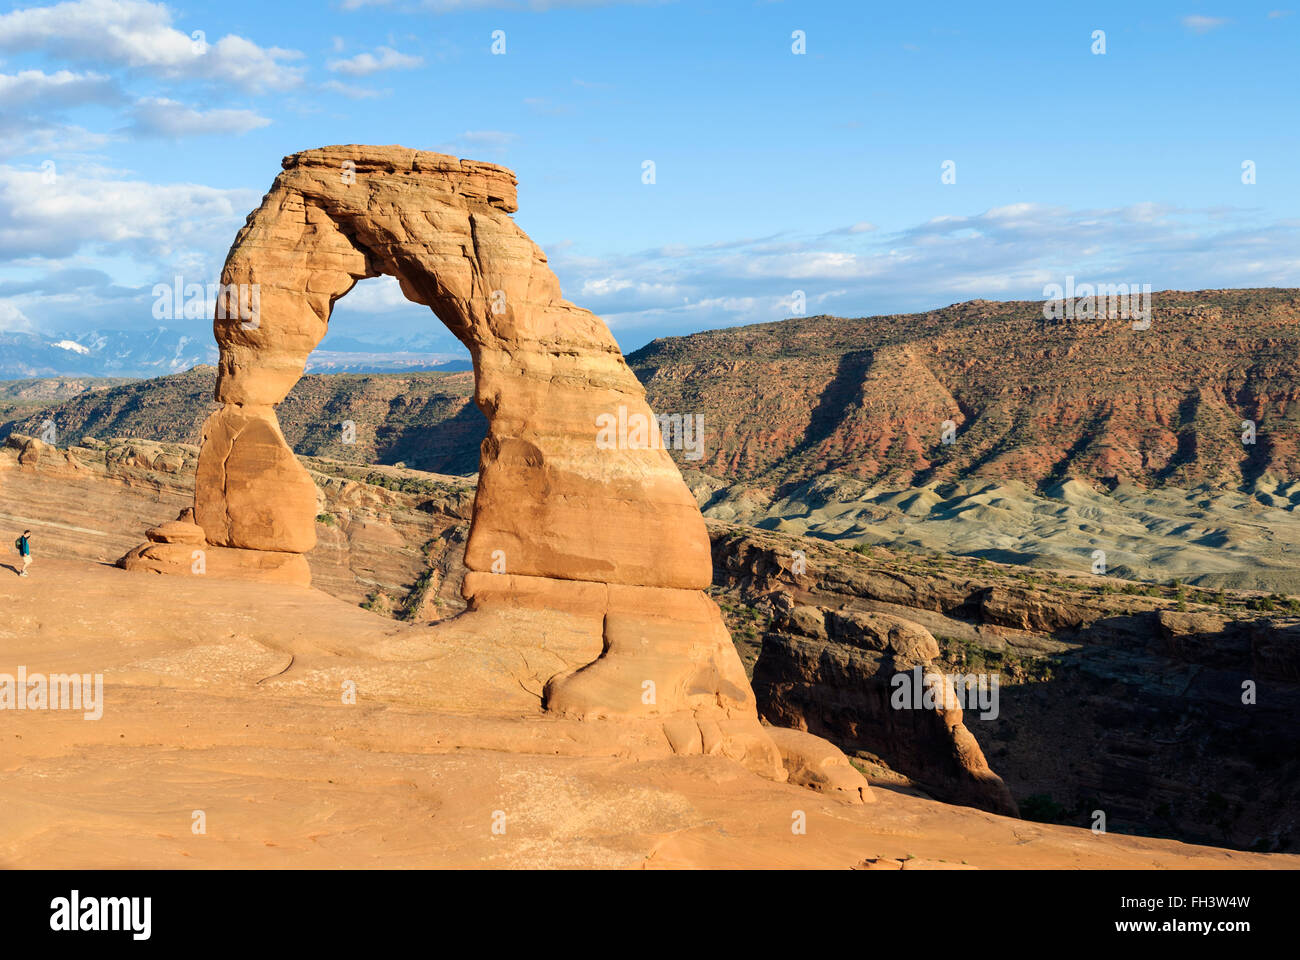 A tourist walks towards Delicate Arch in Arches national Park, Utah, USA Stock Photo